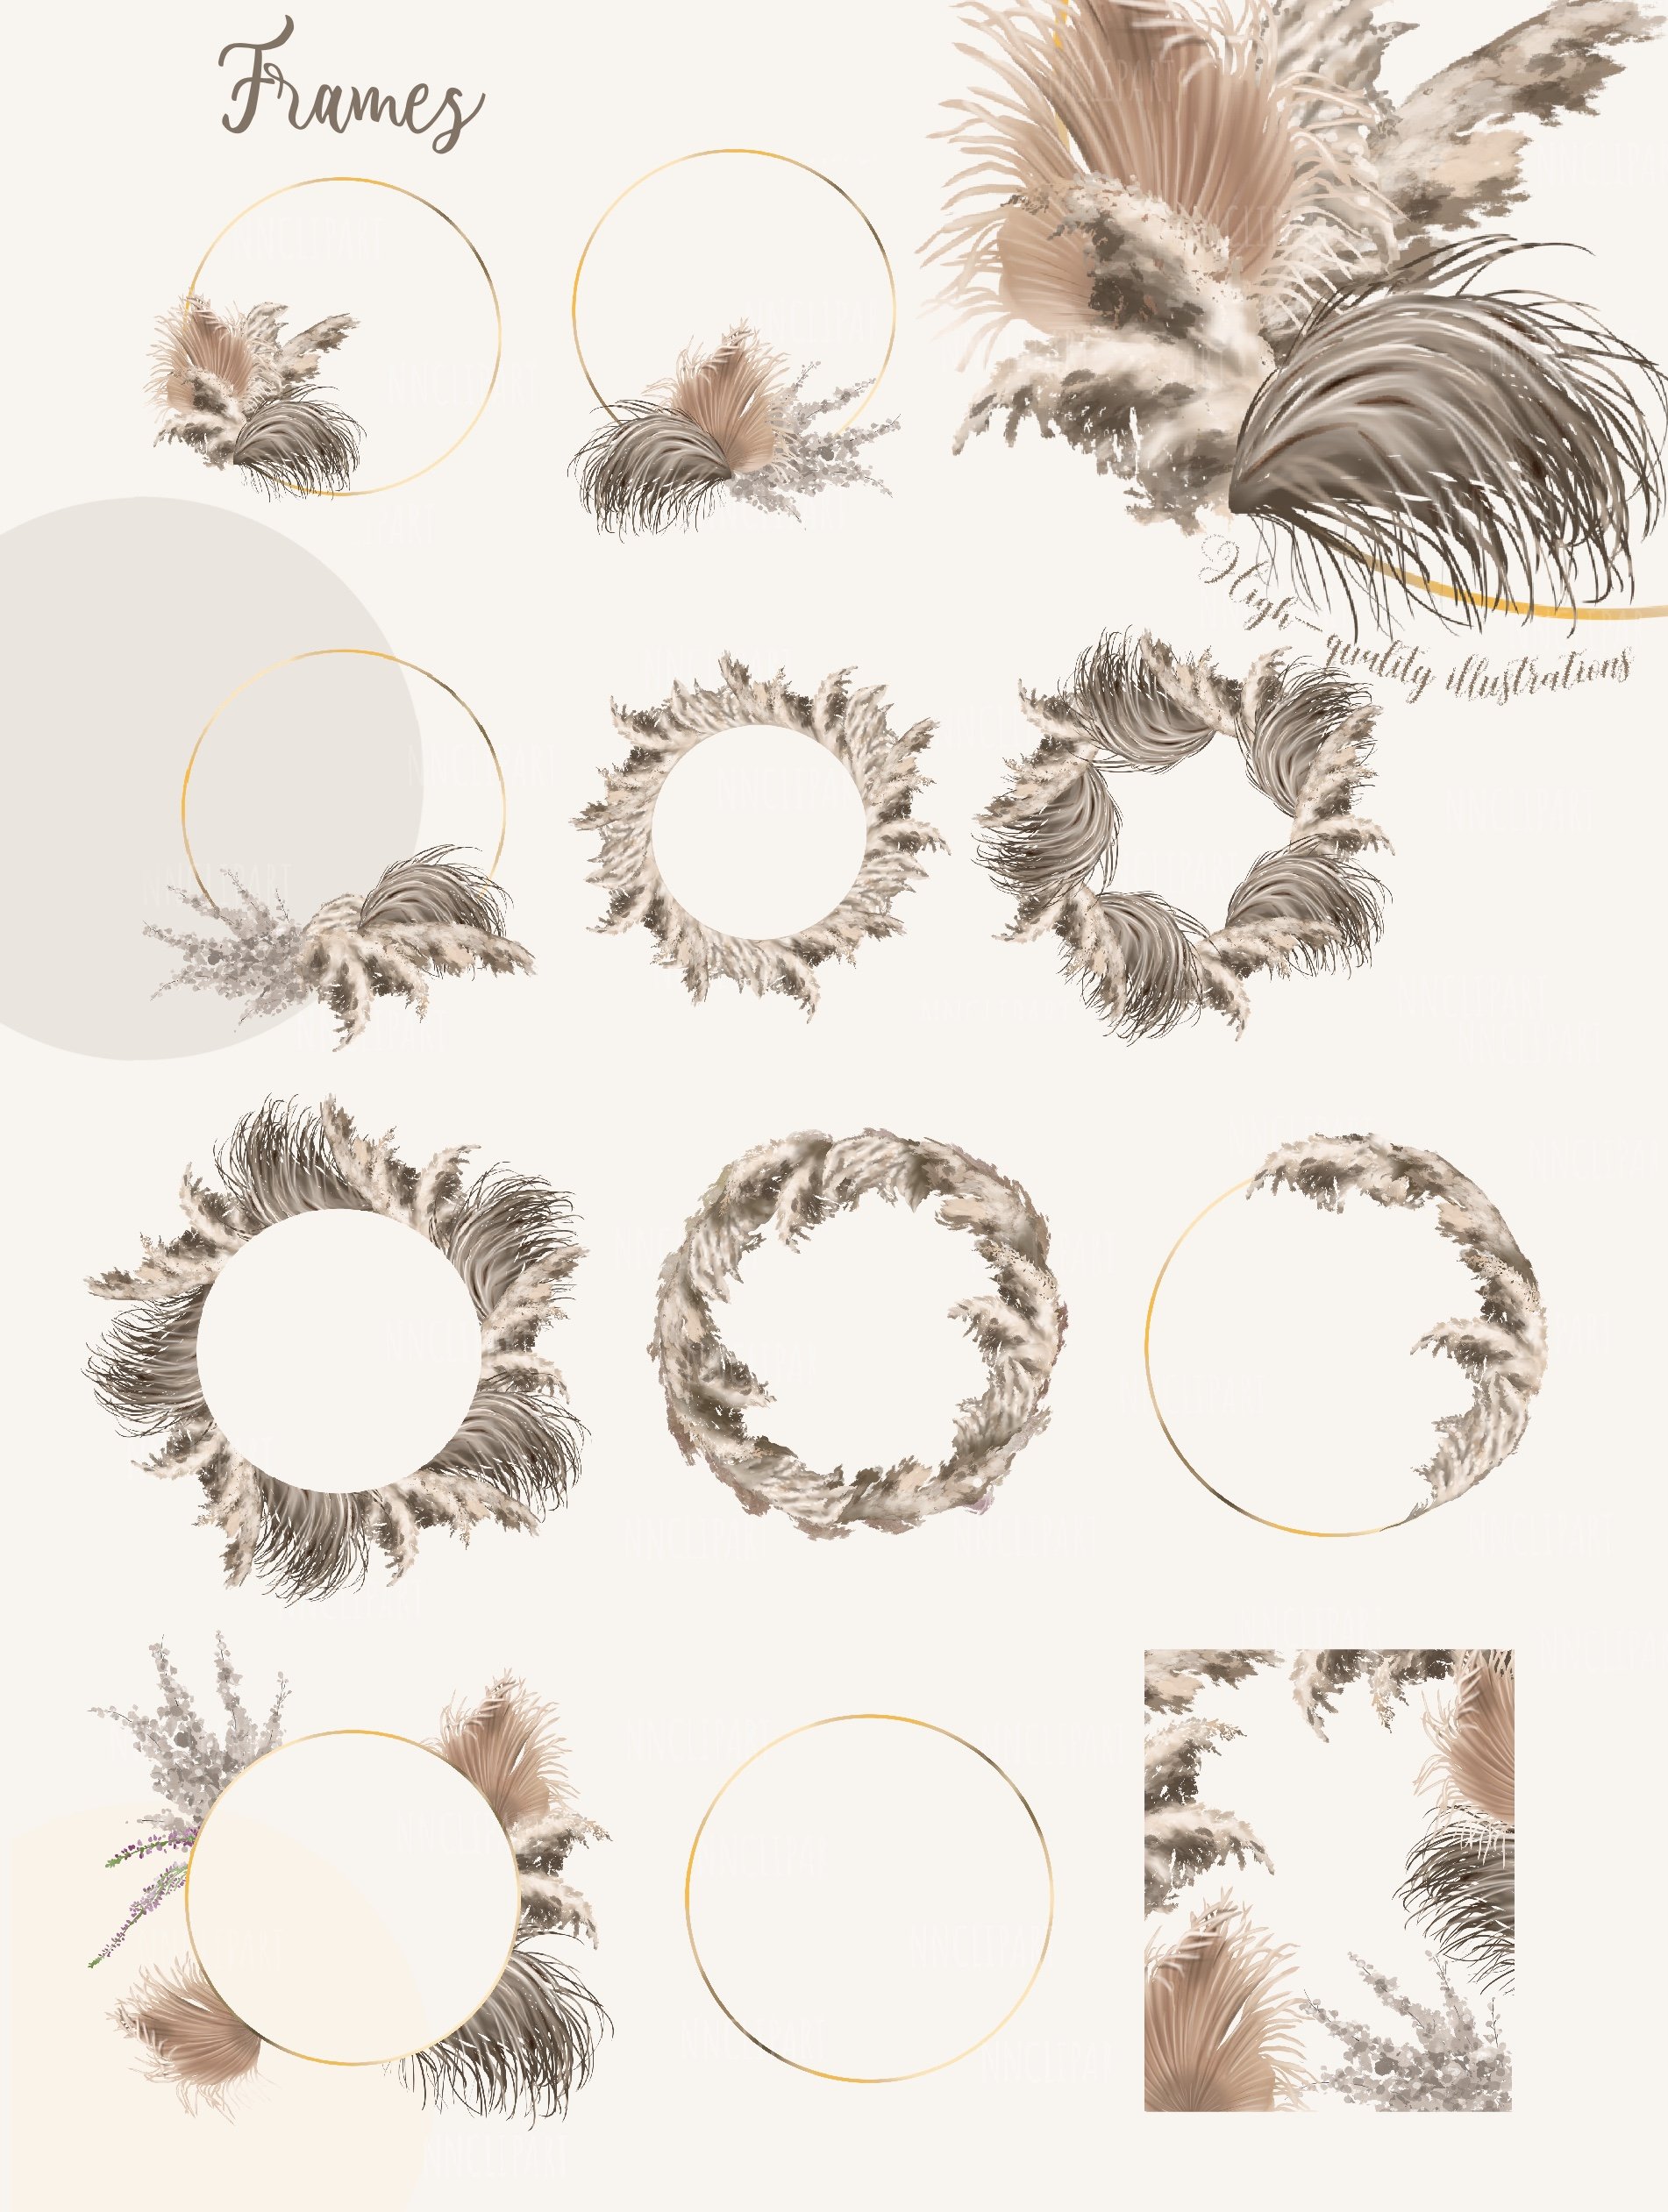 Bunch of different types of feathers on a white background.